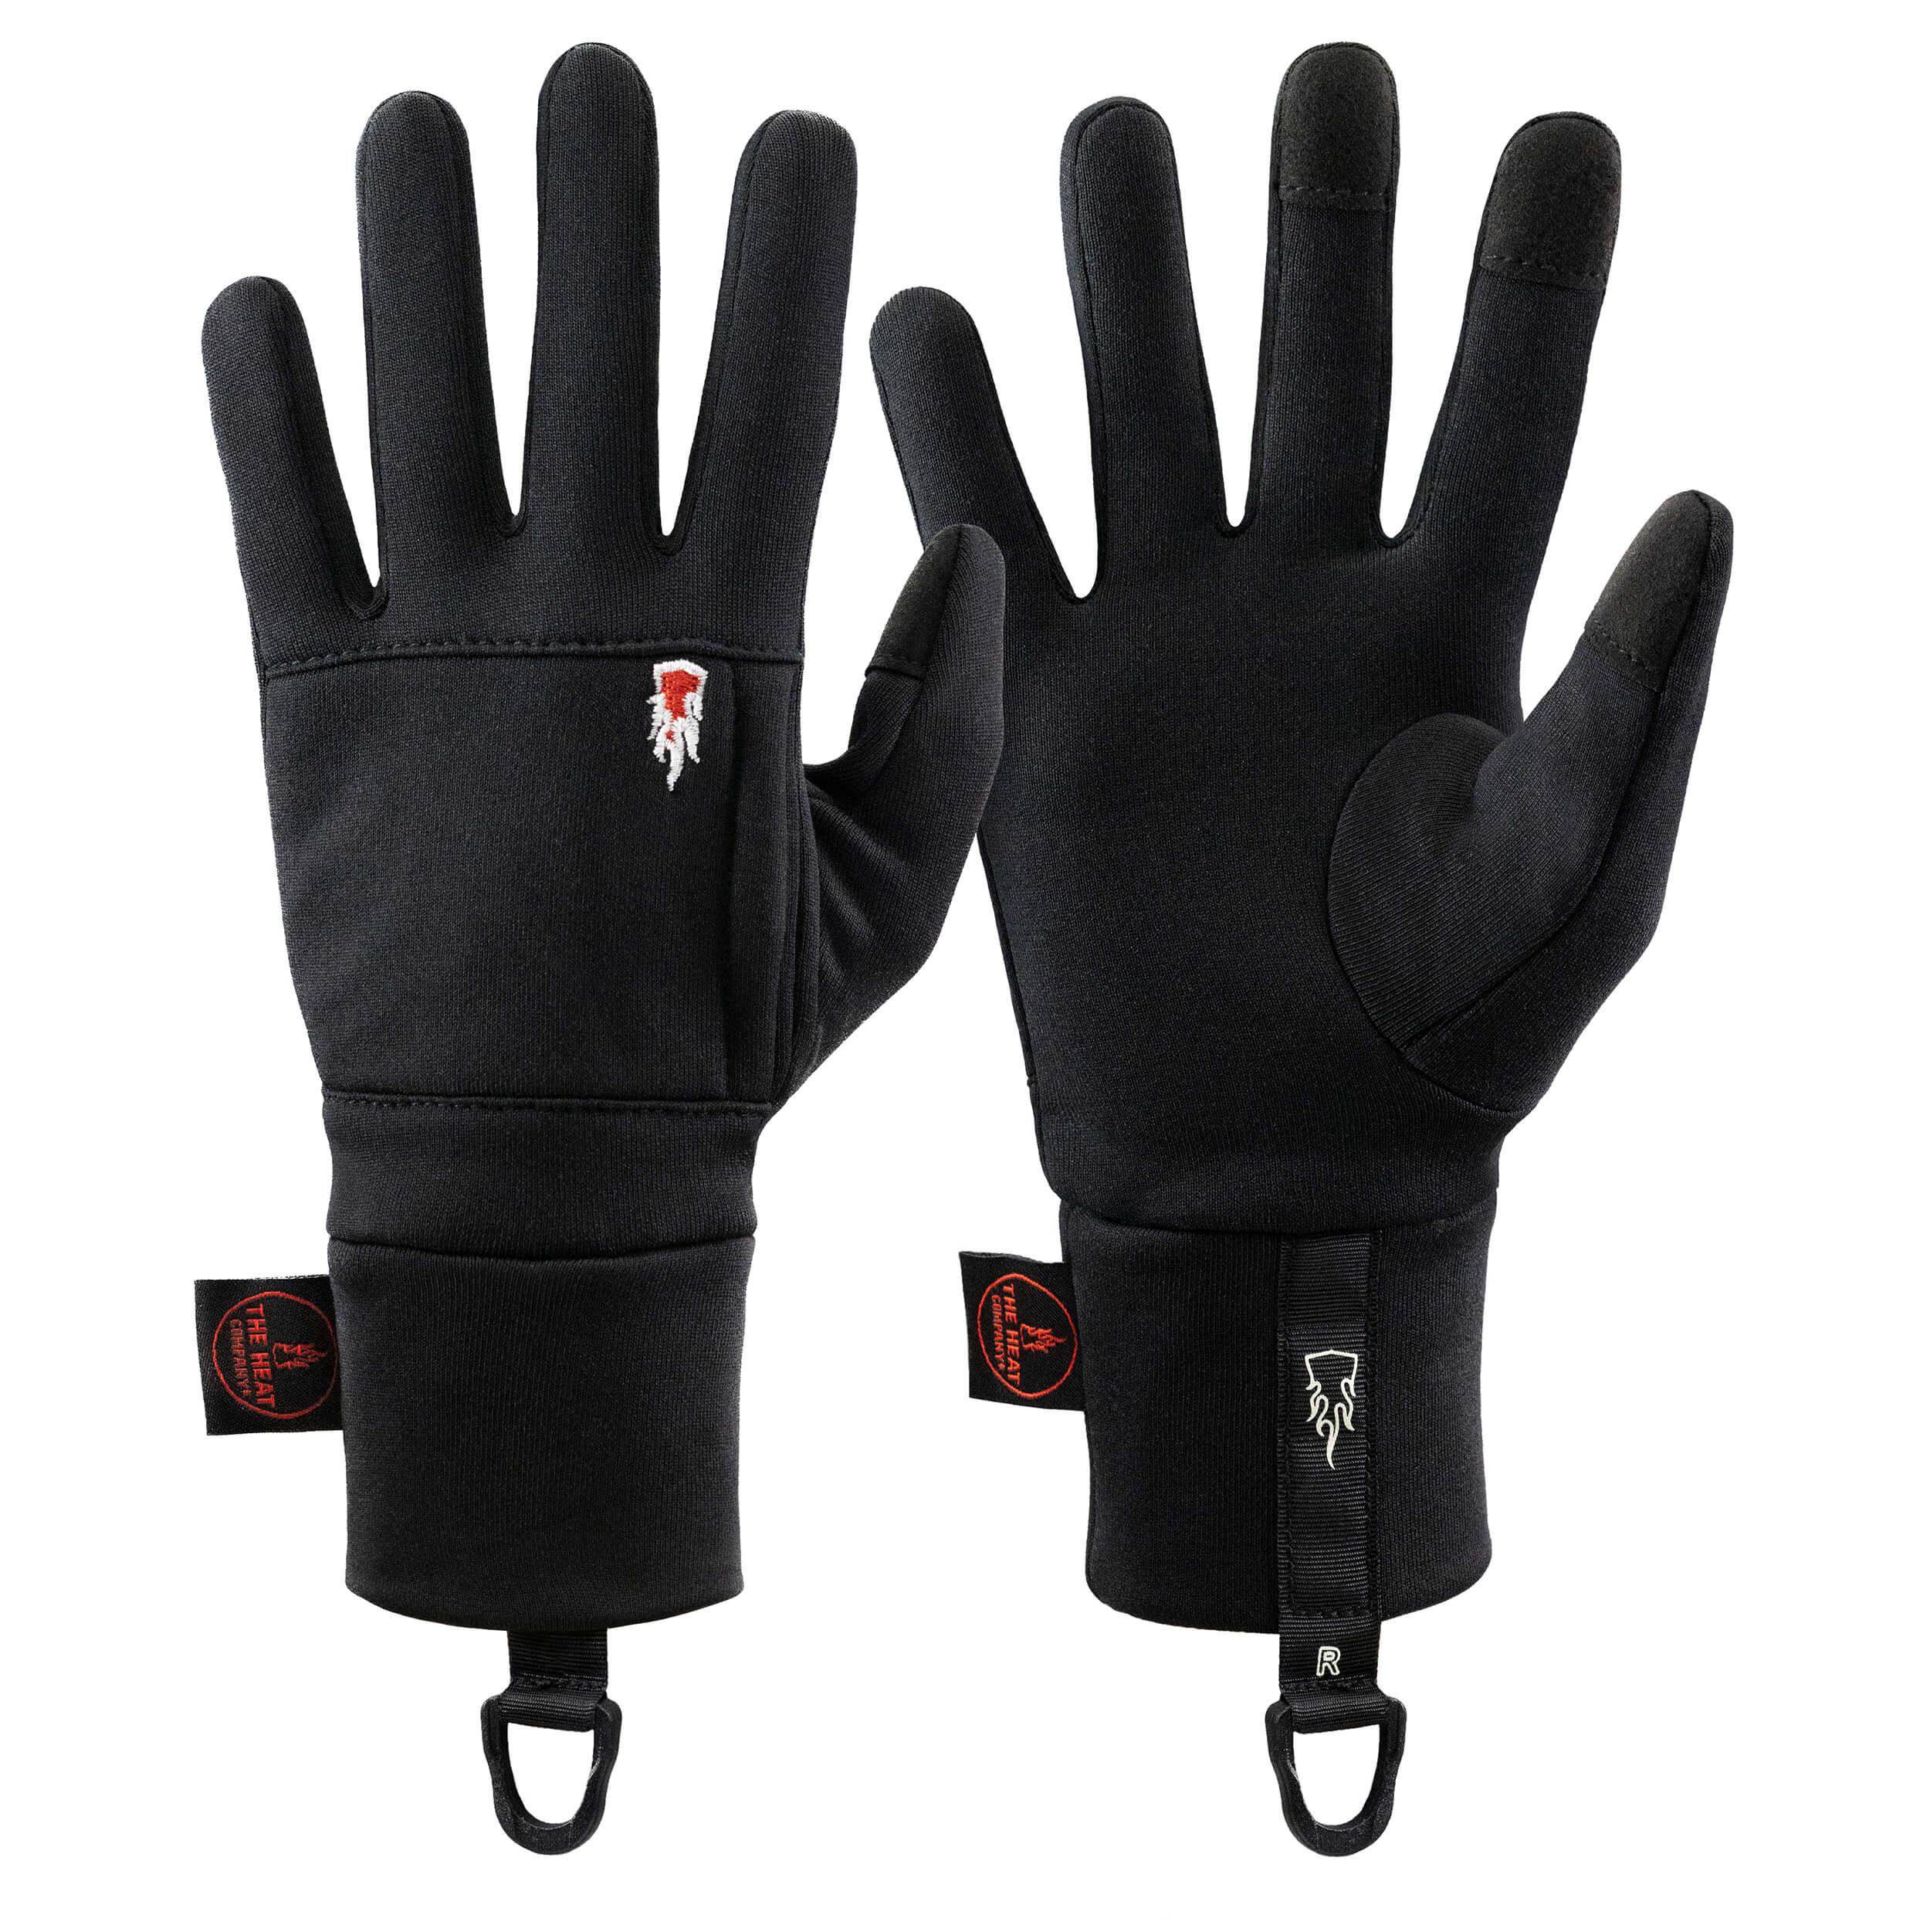 Warm Photography Gloves POLARTEC LINER from THE HEAT COMPANY